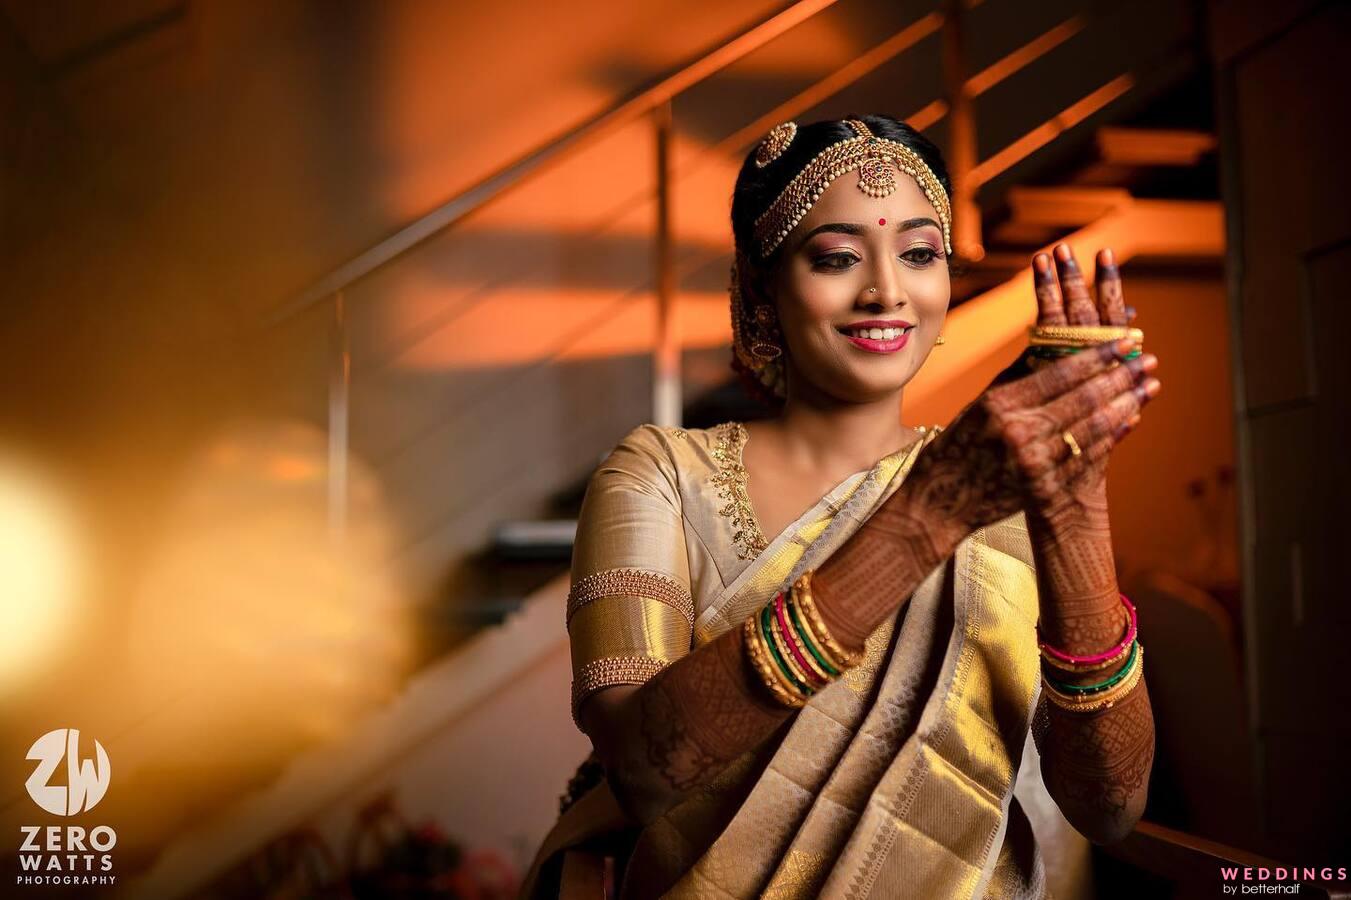 Top 5 Things Not to Do While Posing as an Indian Bride - Alfaaz